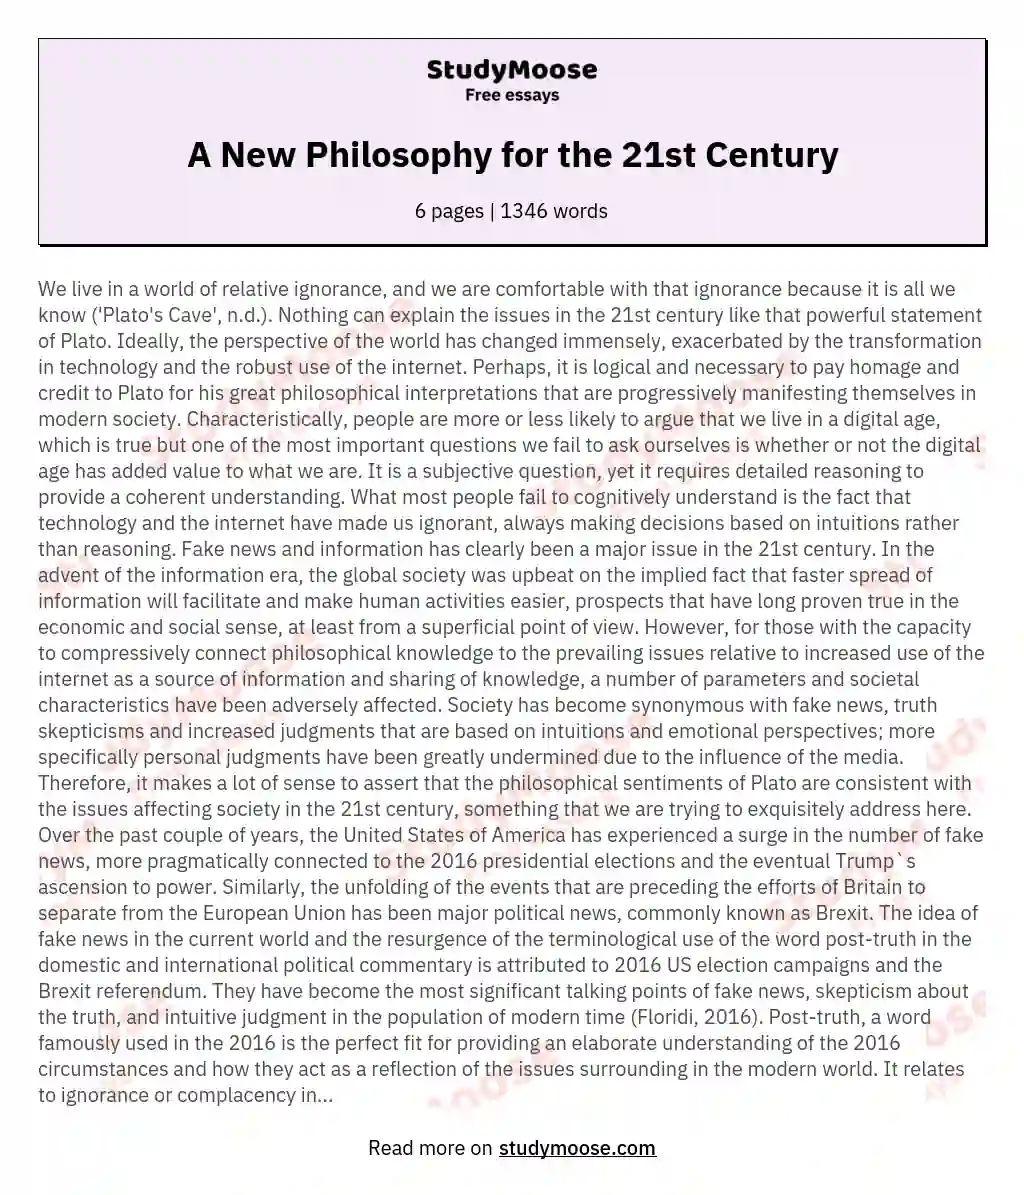 A New Philosophy for the 21st Century essay